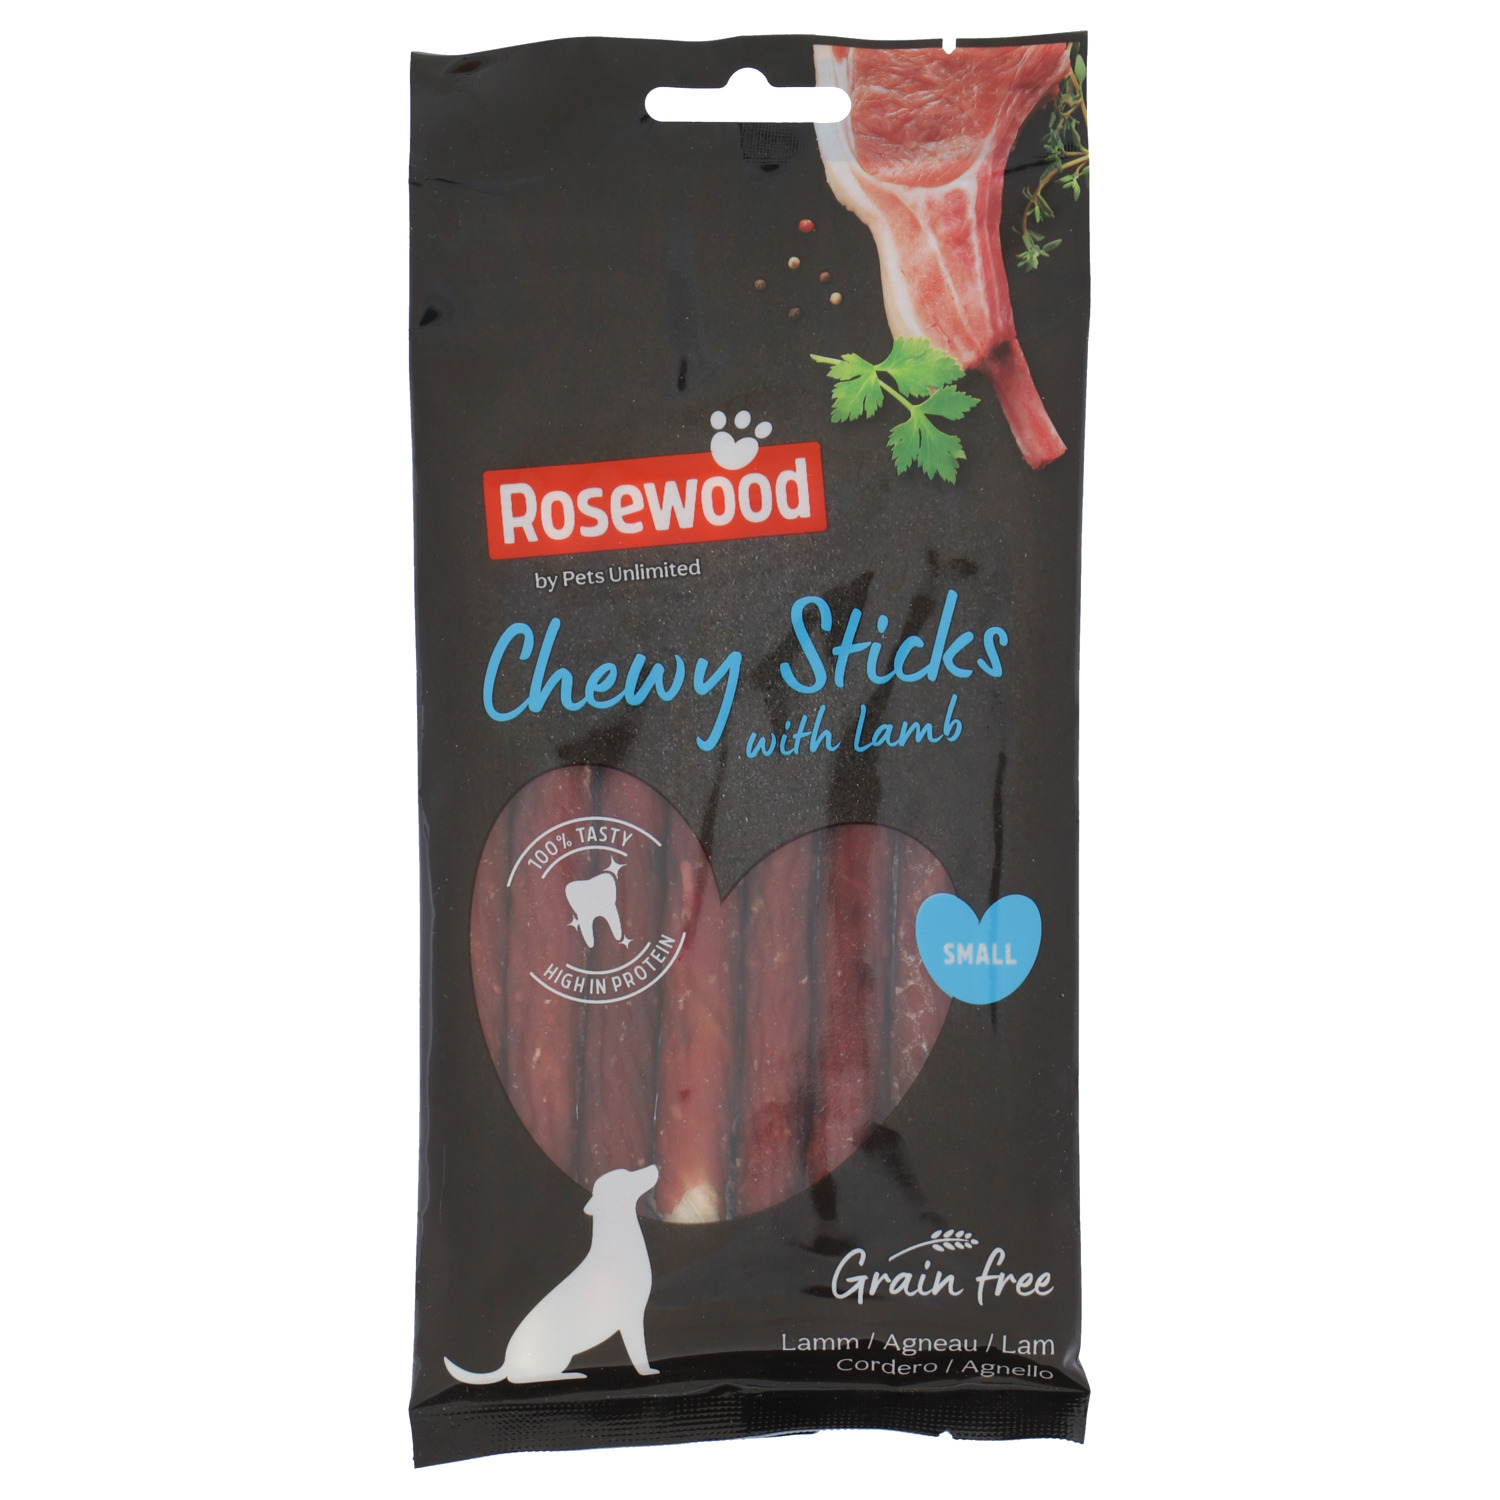 Rosewood Chewy Sticks Lam S 72g